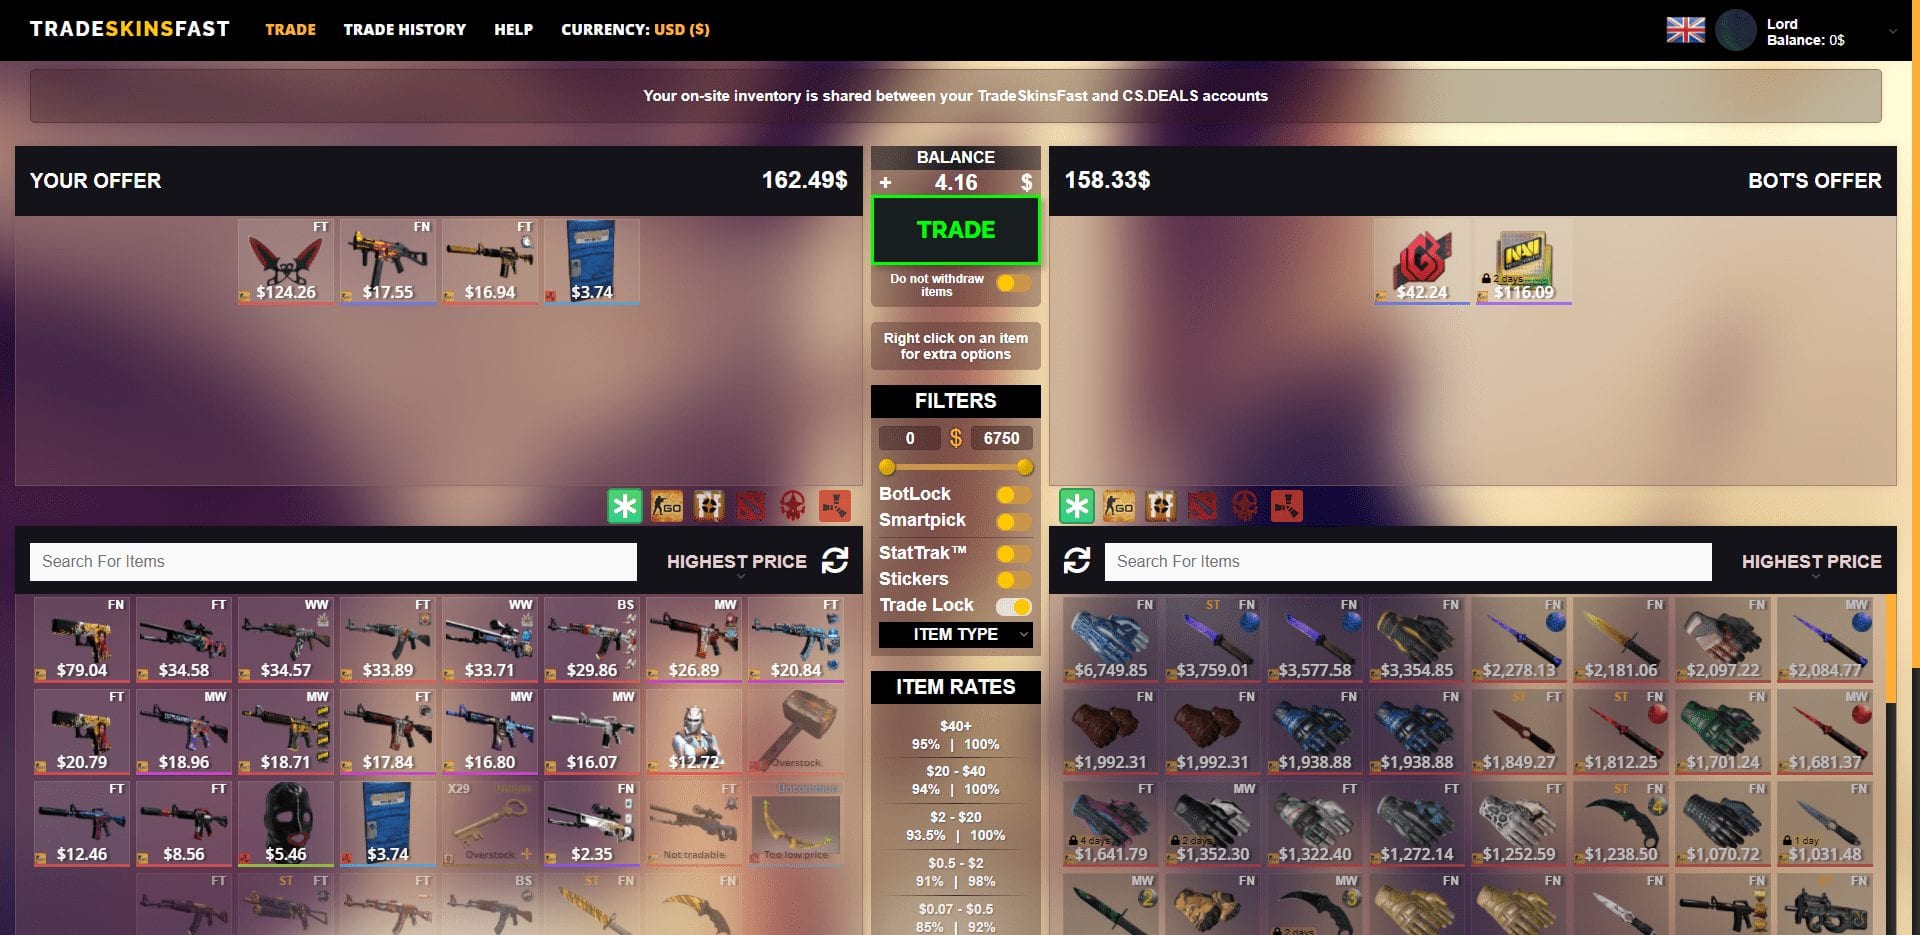 TradeSkinsFast Trade Offer Page